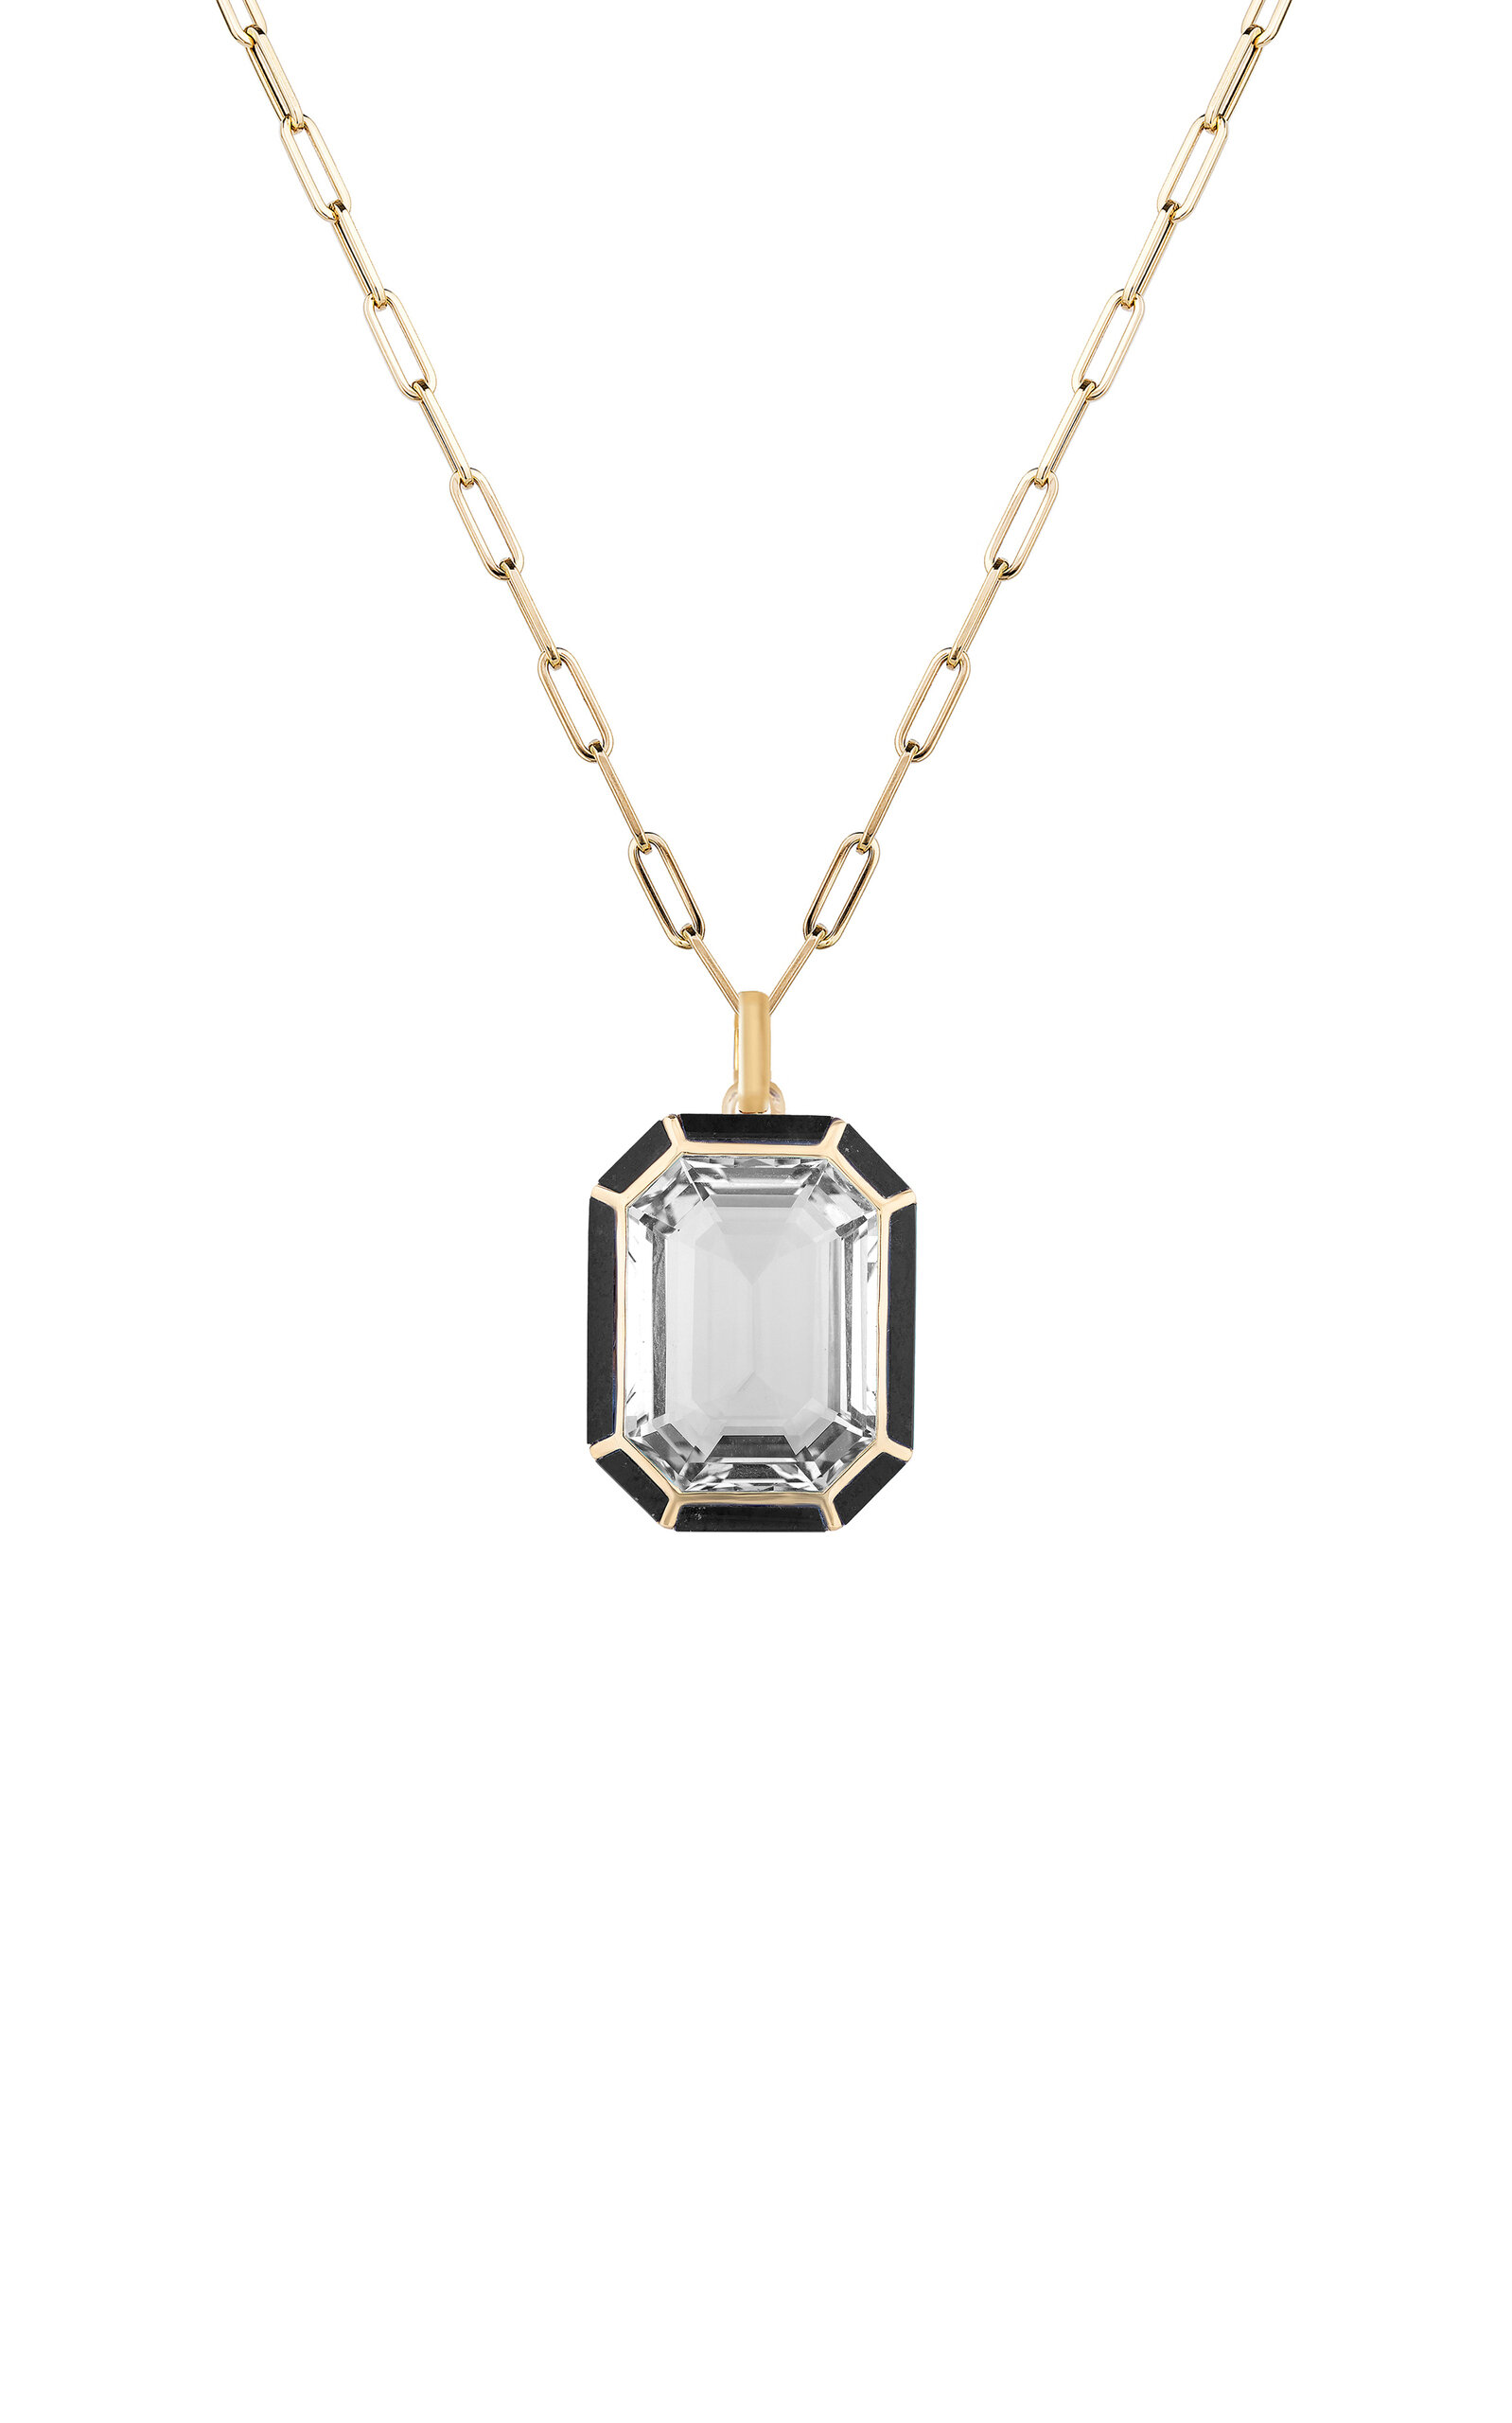 18K Yellow Gold Crystal and Onyx Pendant Necklace